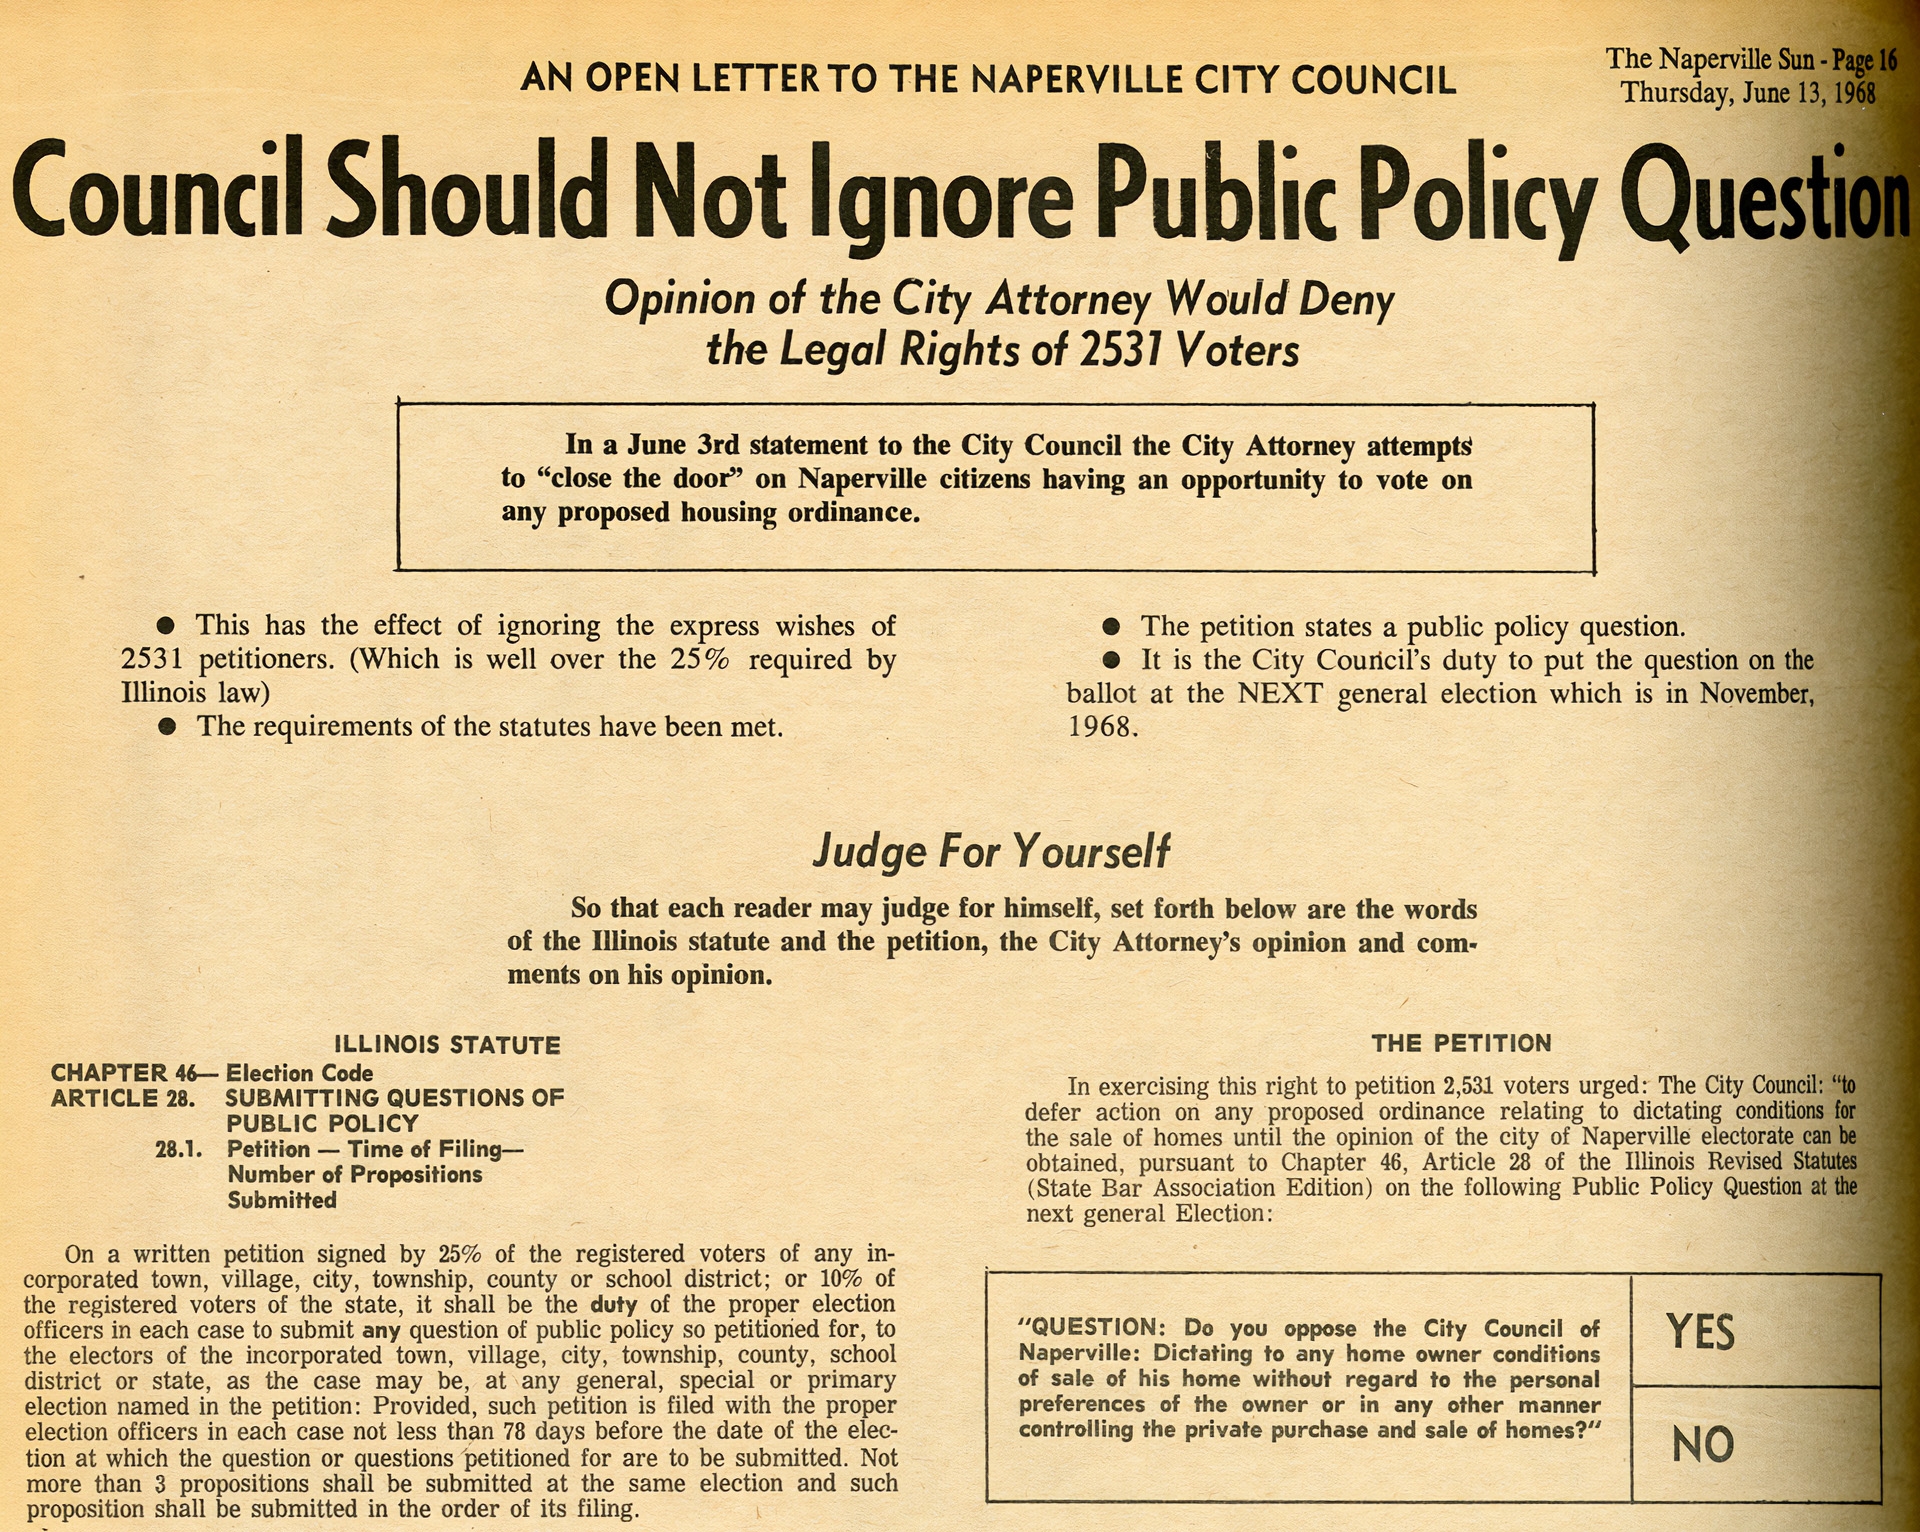 An open letter to City Council asking that the fair housing ordinance be placed on the ballot, published in Naperville Sun on June 13, 1968. The City Attorney rejected this petition and City Council voted 4-1 for fair housing on July 1, 1968.